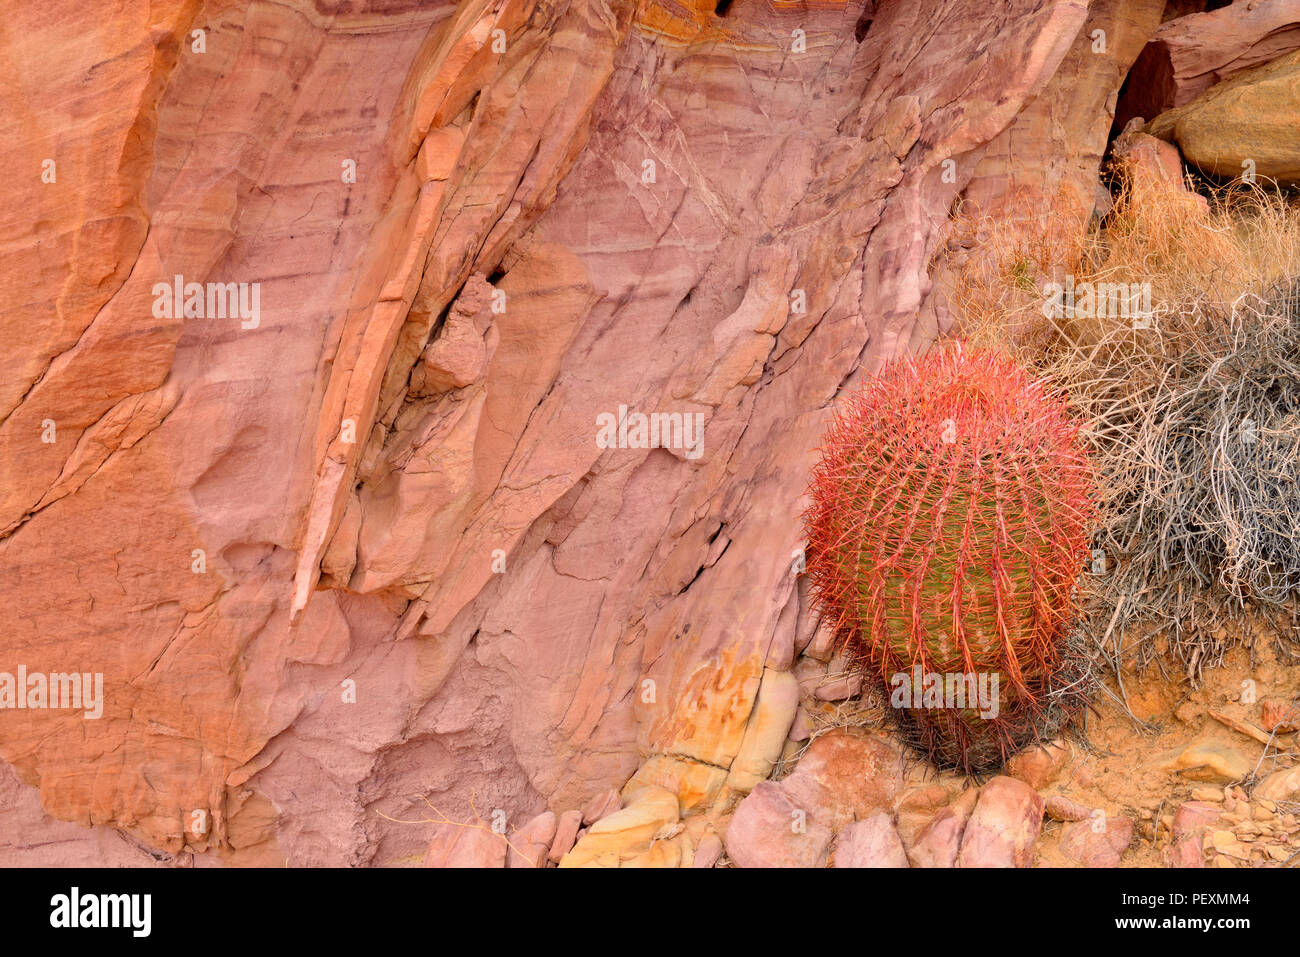 Weathered red rock formations and Barrel Cactus (Ferocactus acanthodes), Valley of Fire State Park, Nevada, USA Stock Photo